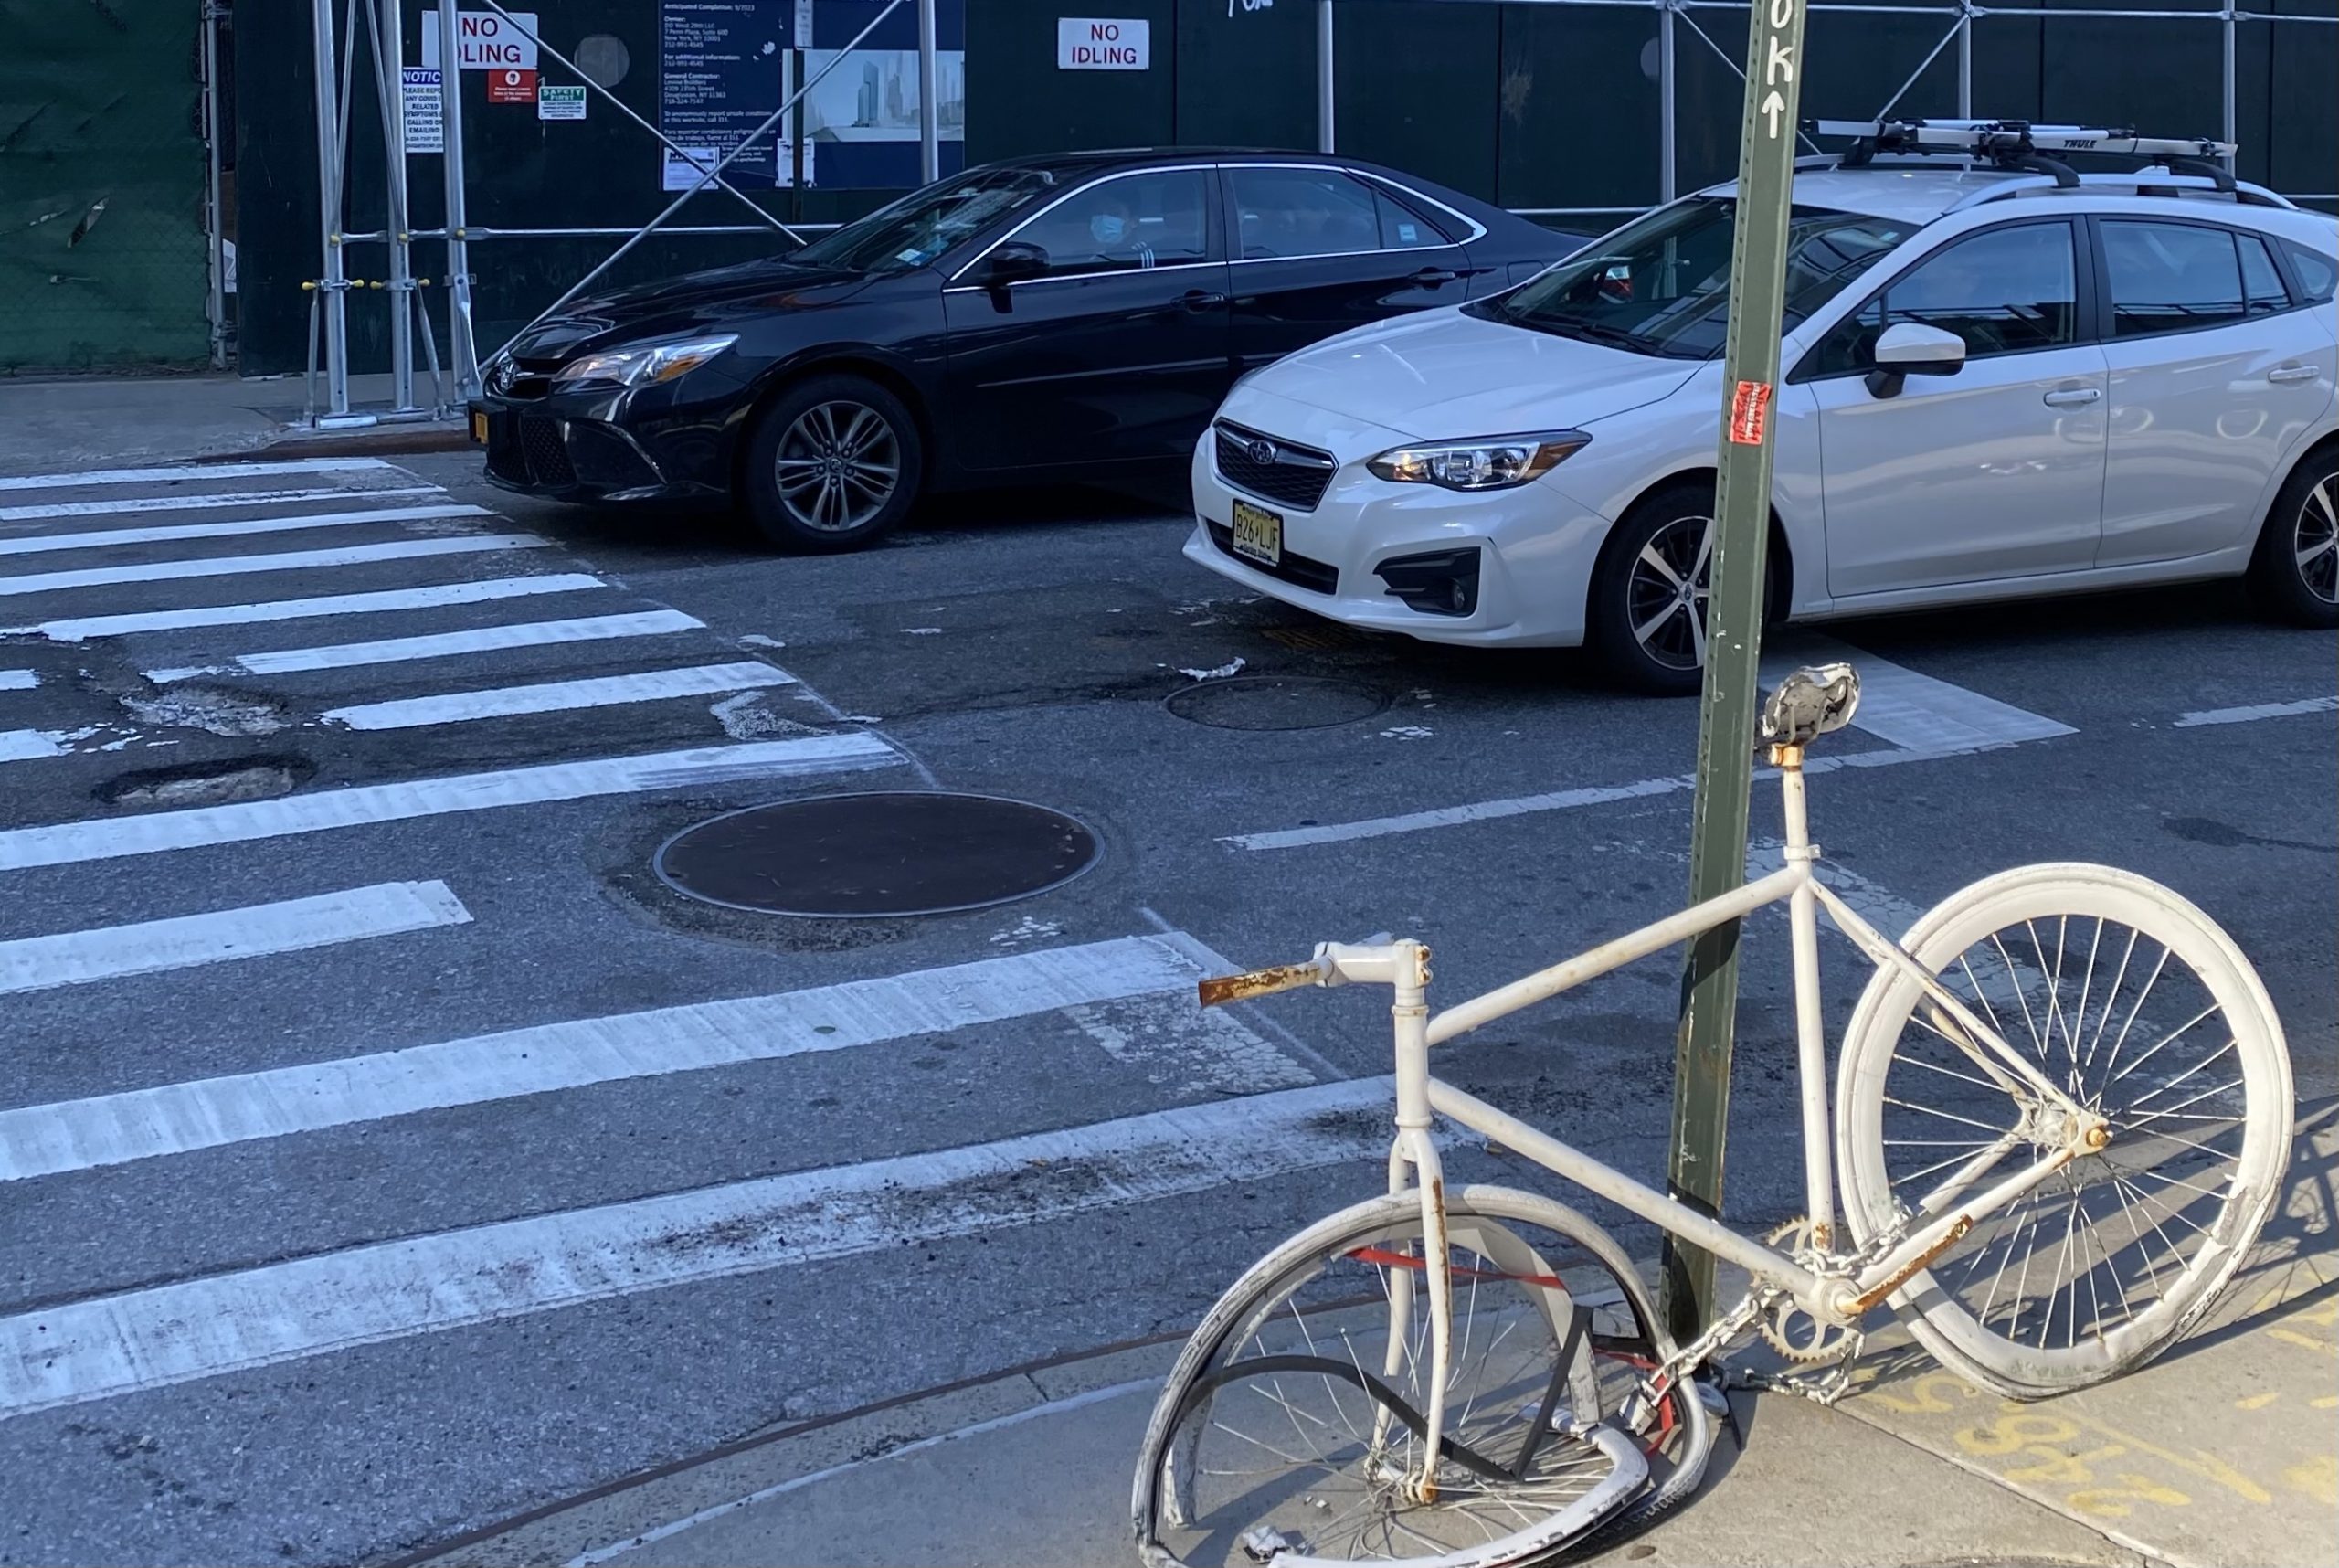 Ghost bike showing locations of previous NYC deadly bicycle accidents